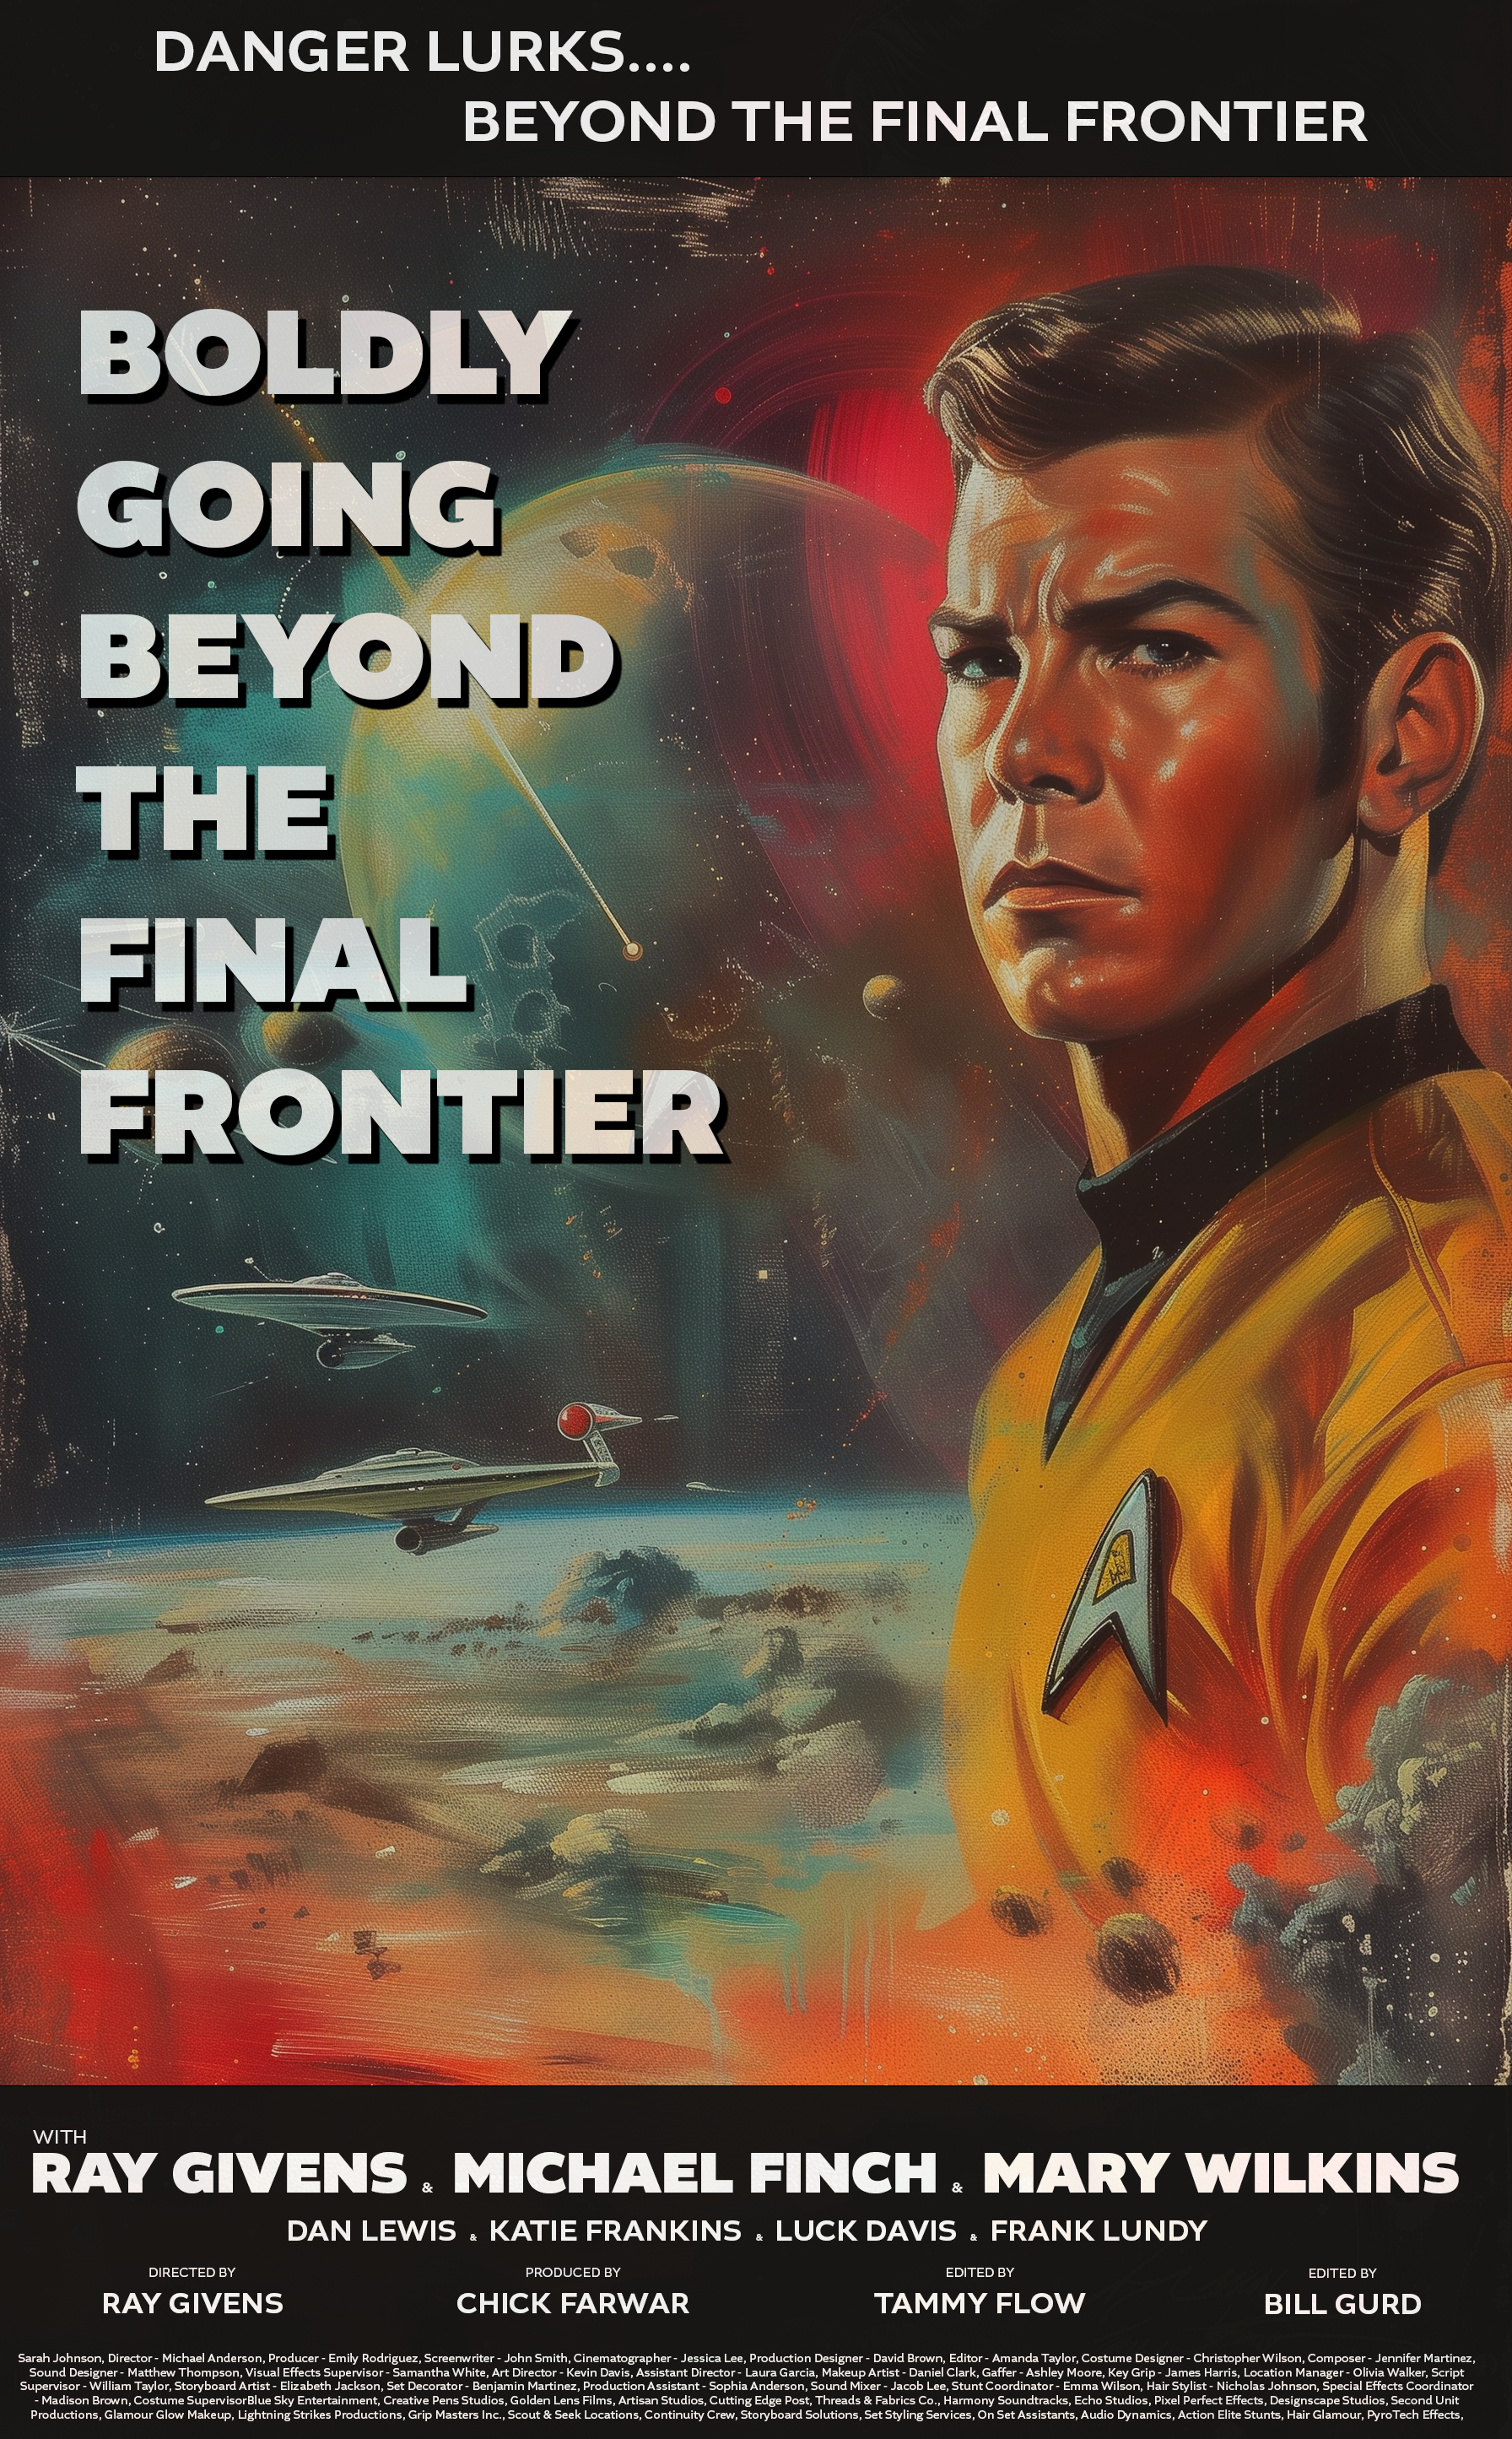 Name:  Beyond the Final Frontier.png
Views: 162
Size:  8.19 MB